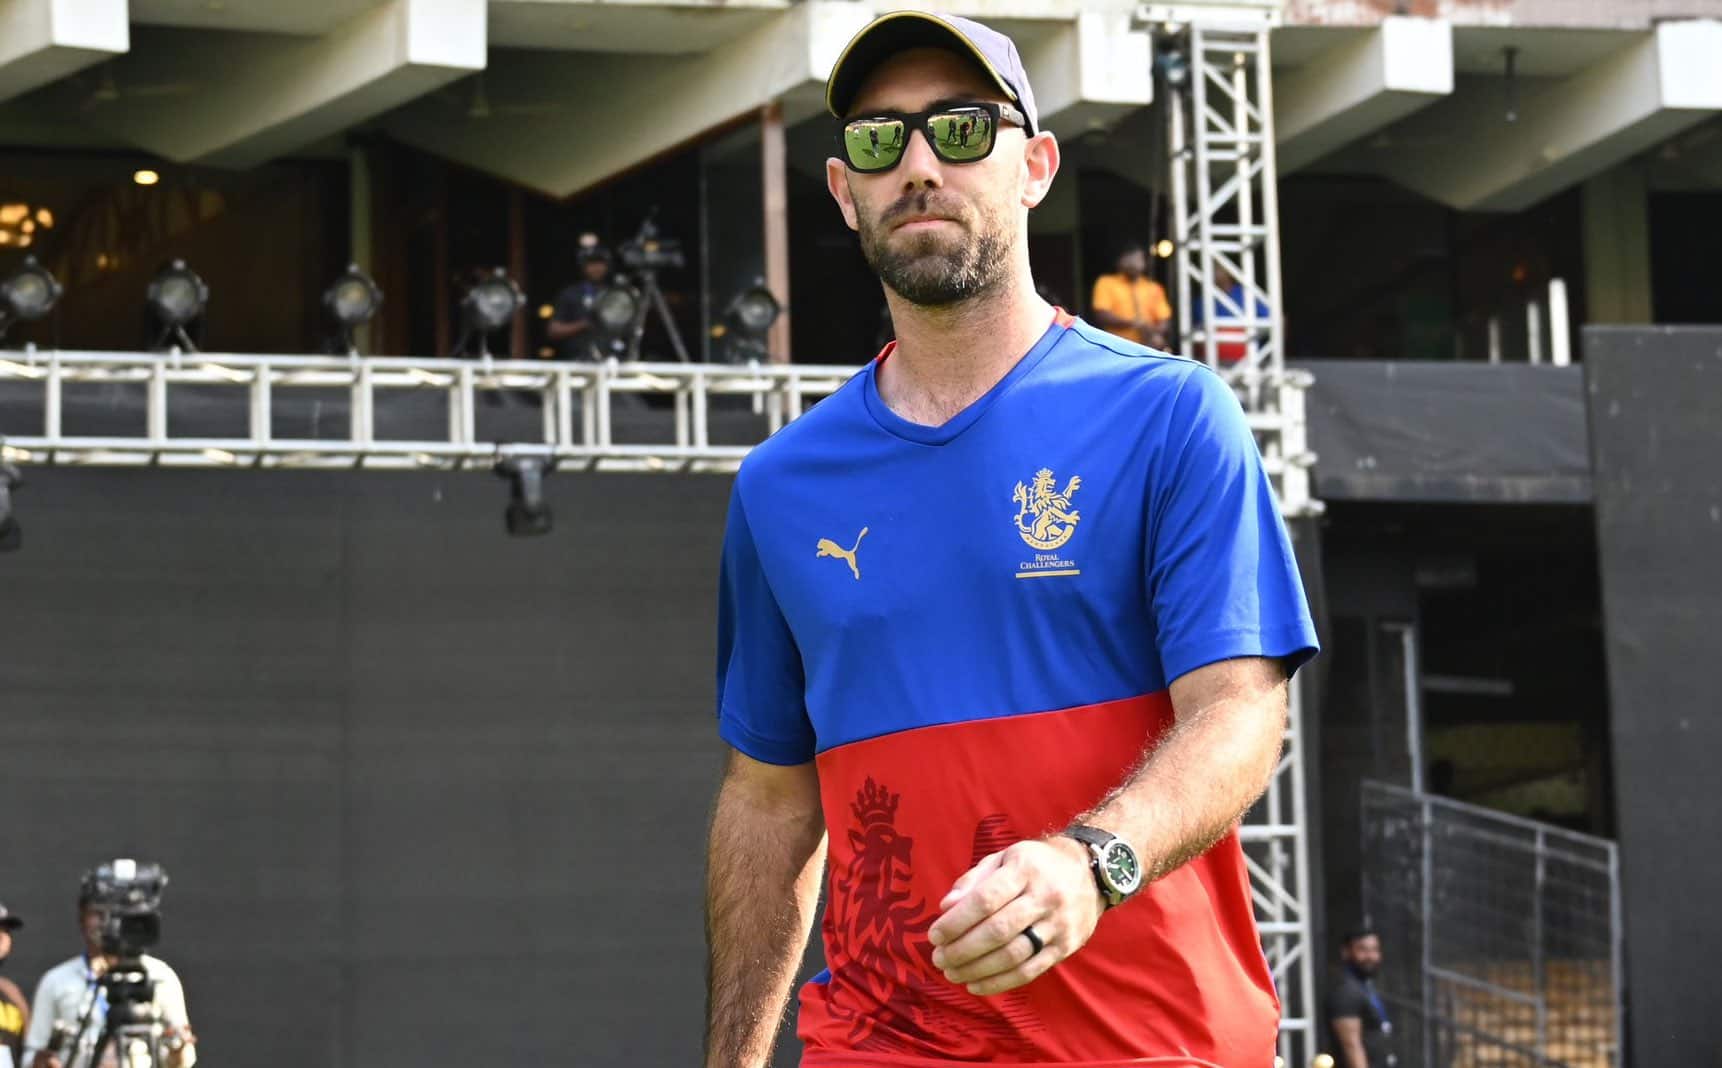 Glenn Maxwell will be a key player for RCB in the match [X]